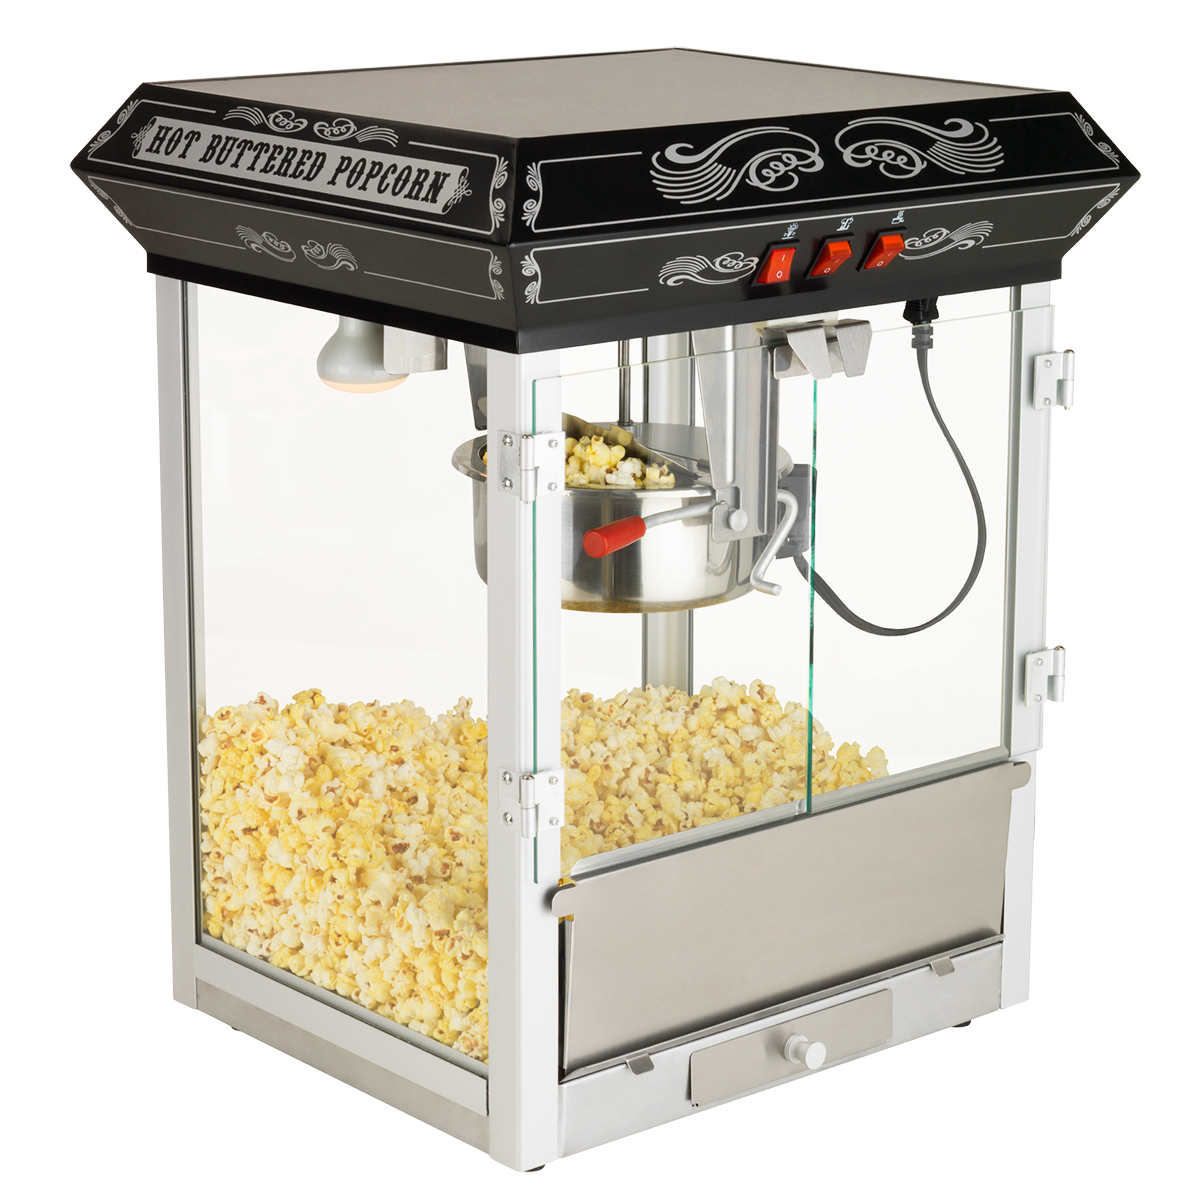 Popcorn And The Hot Air Popper – FlatbreadGarden